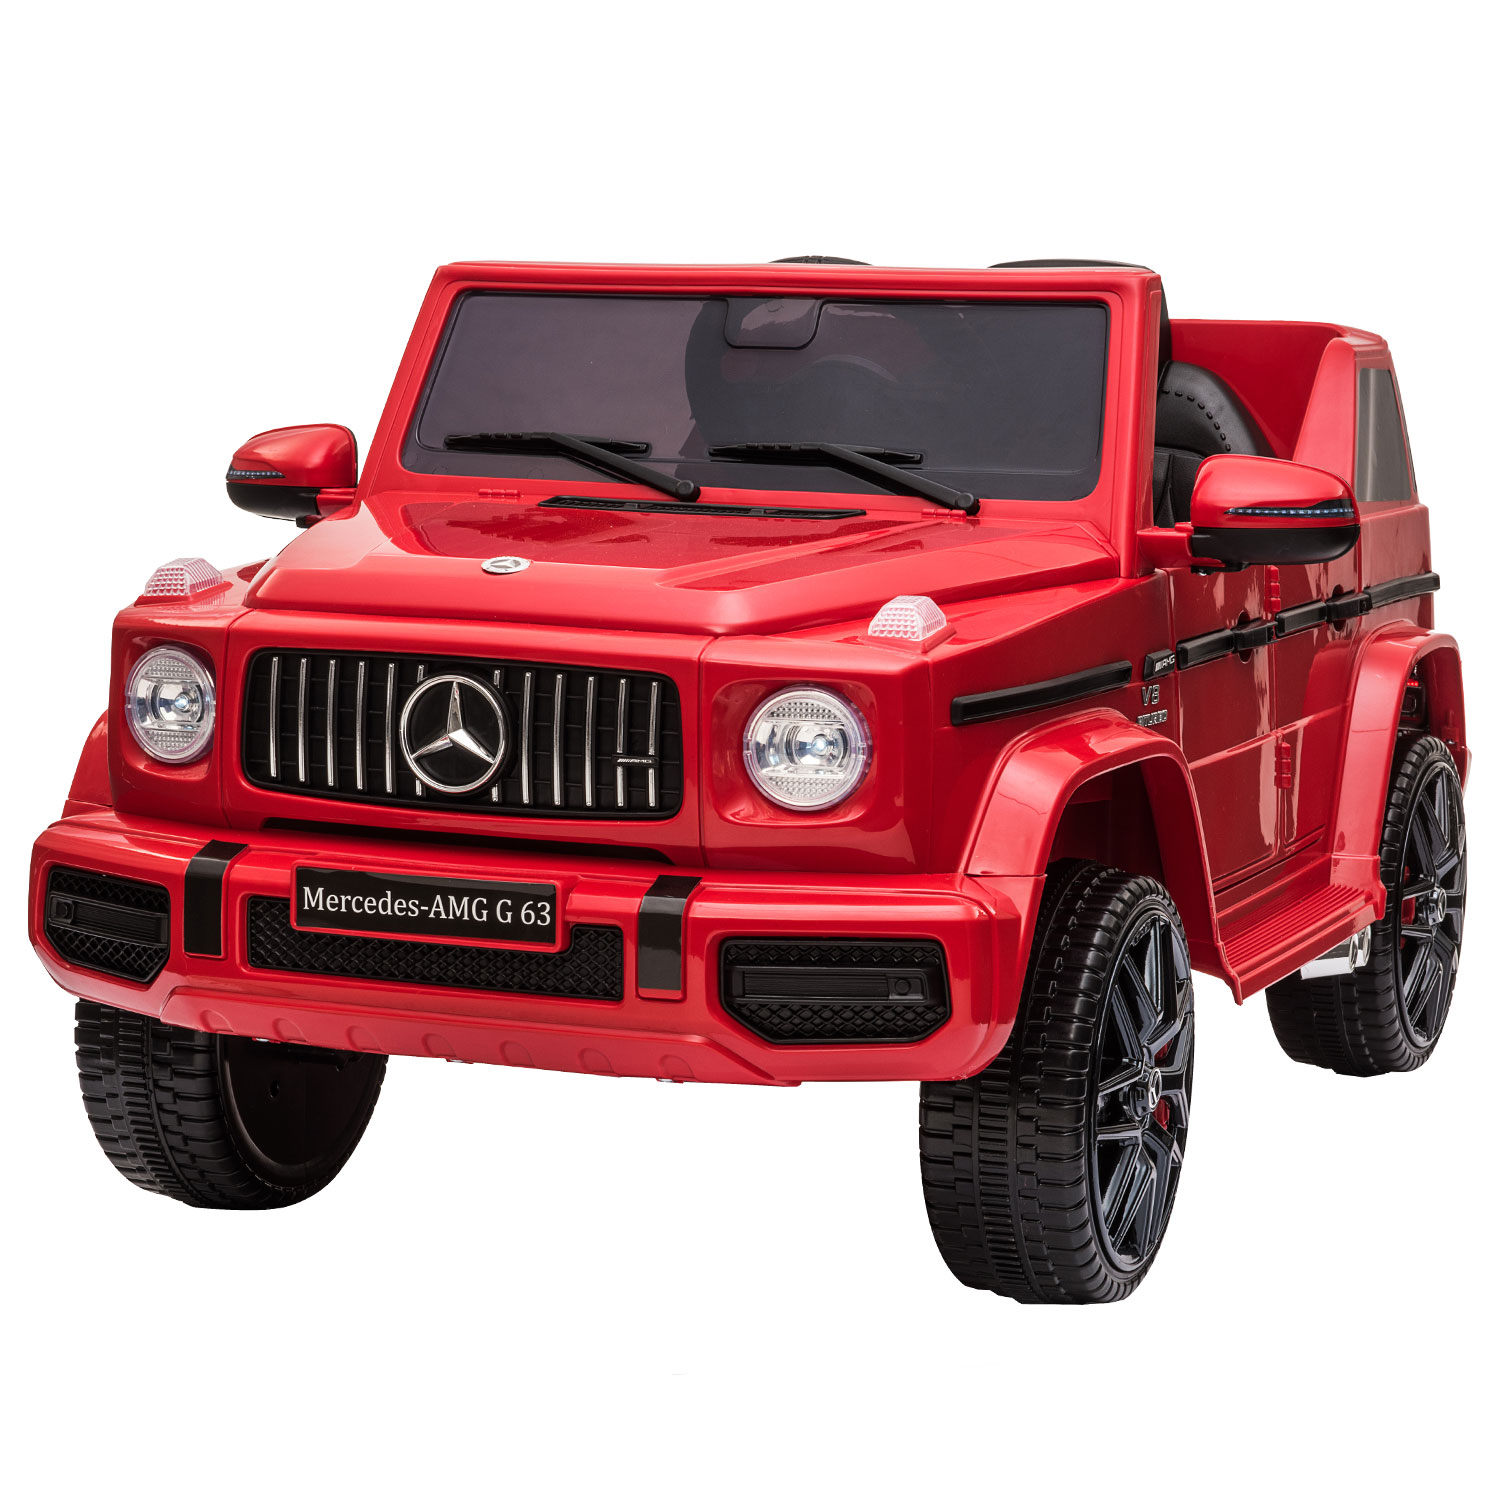 12V kids Ride On Jeep with Remote Control, Electric Car for Kids 3-6 Years, 3 Speeds, Music Story Playing, LED Lights, MP3 Player,Red-CASAINC